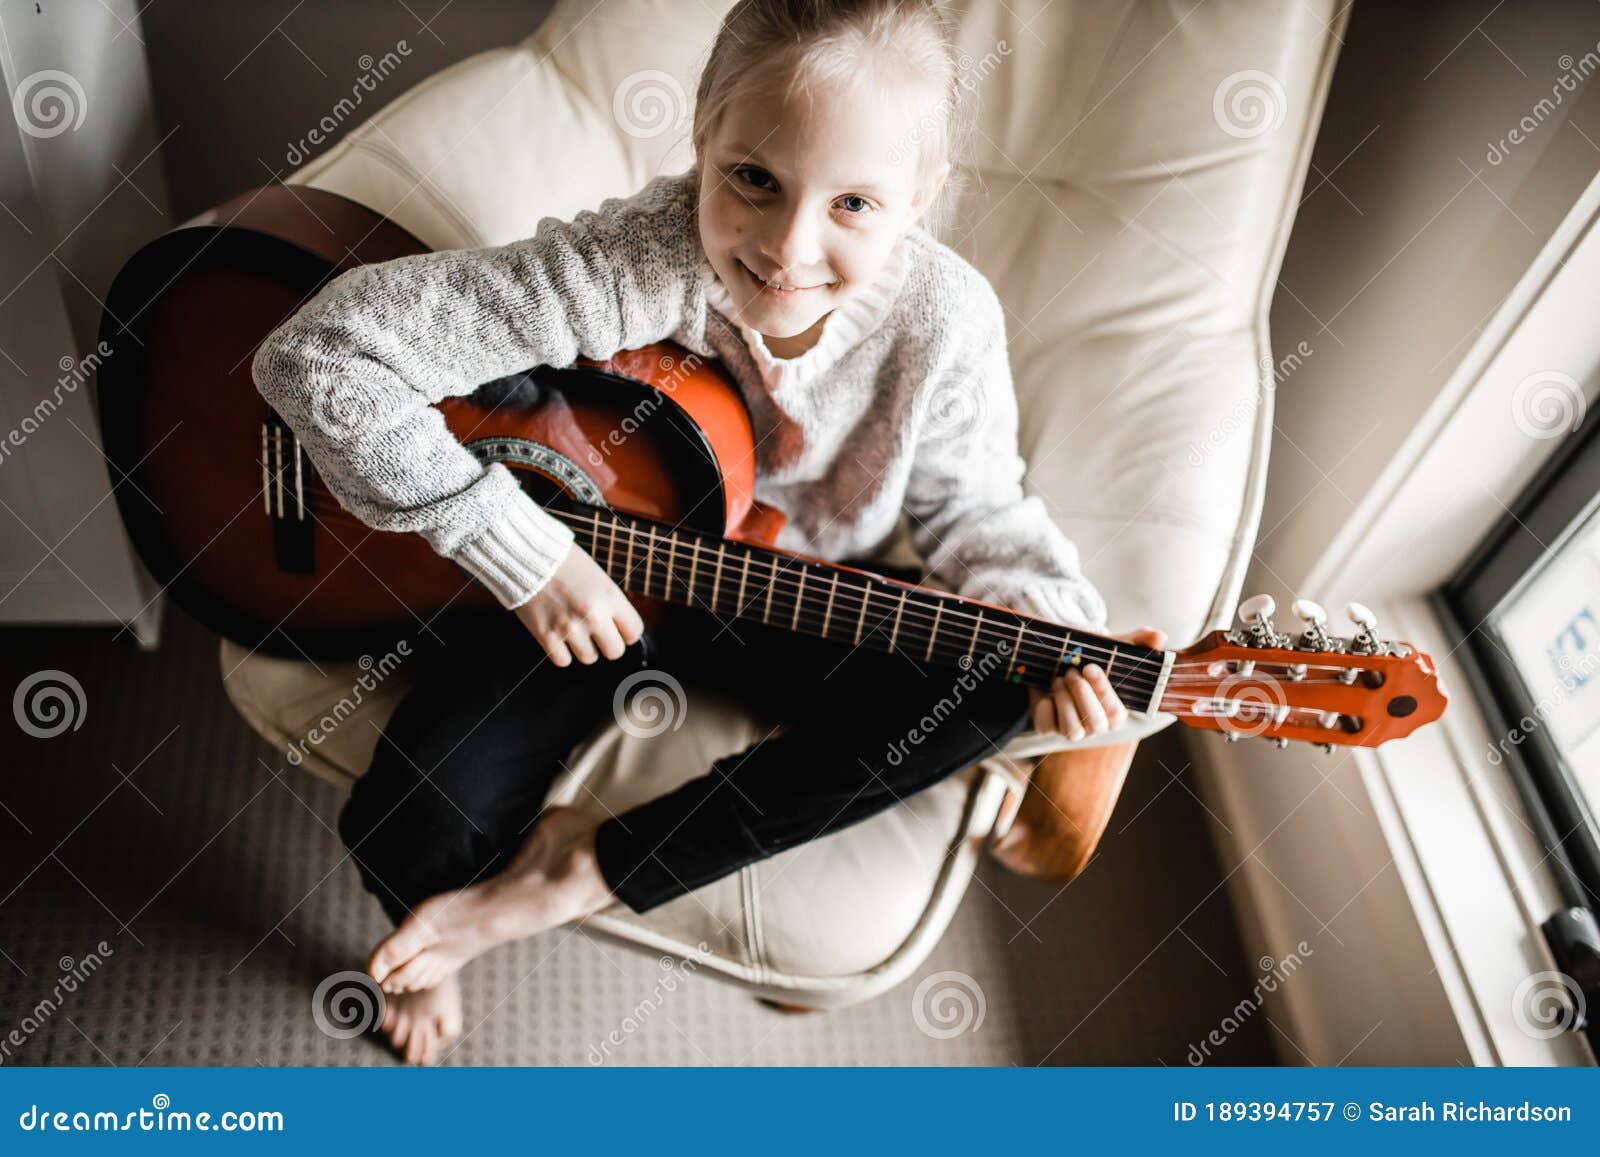 a young caucasion girl practicing playing her guitar